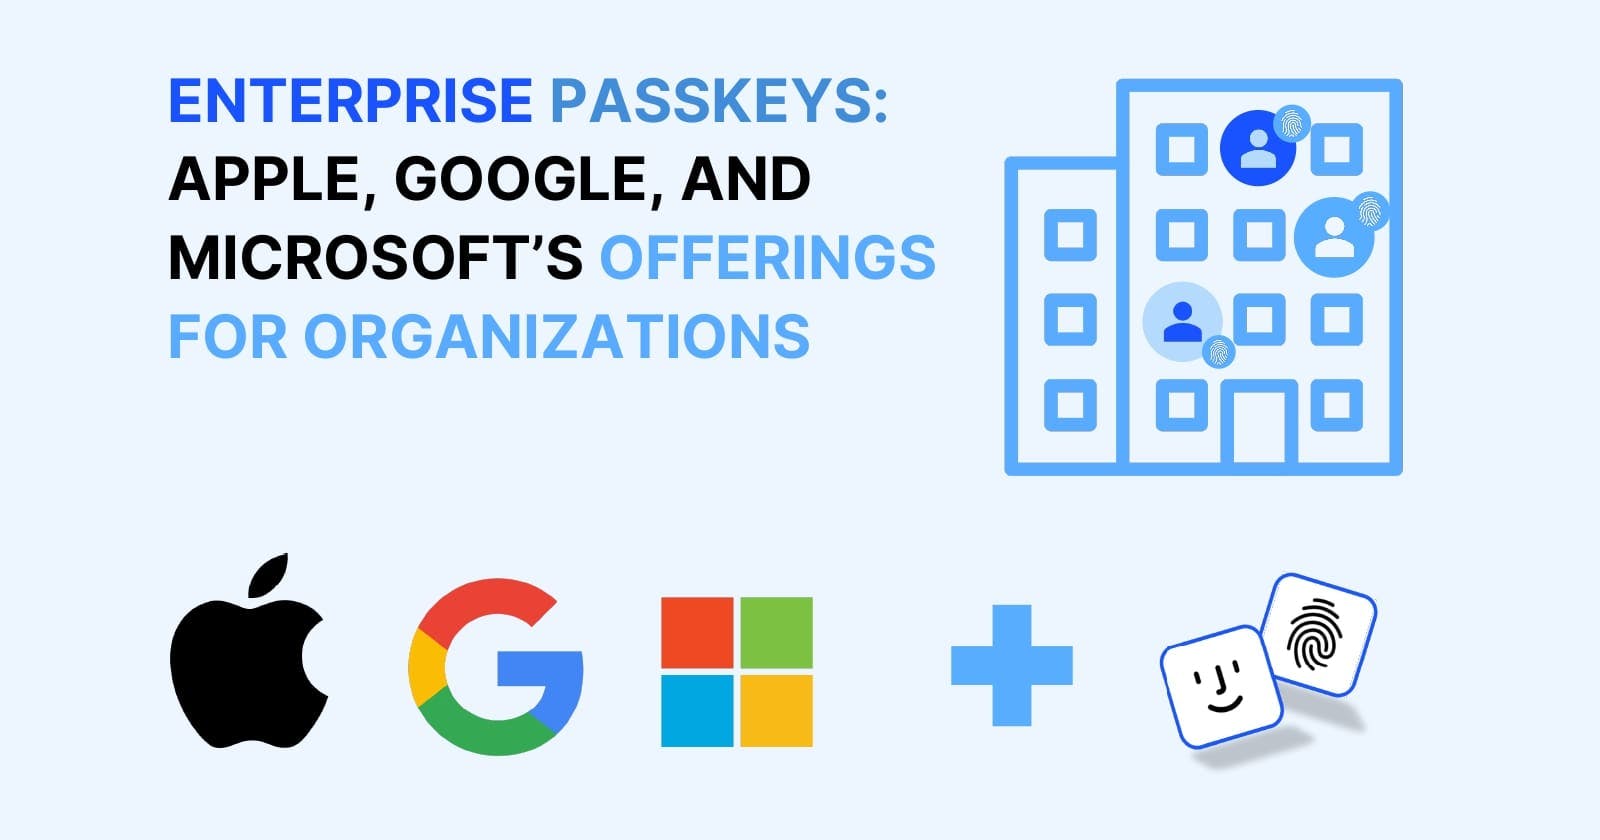 Enterprise Passkeys: Where do Apple, Google, and Microsoft stand right now?